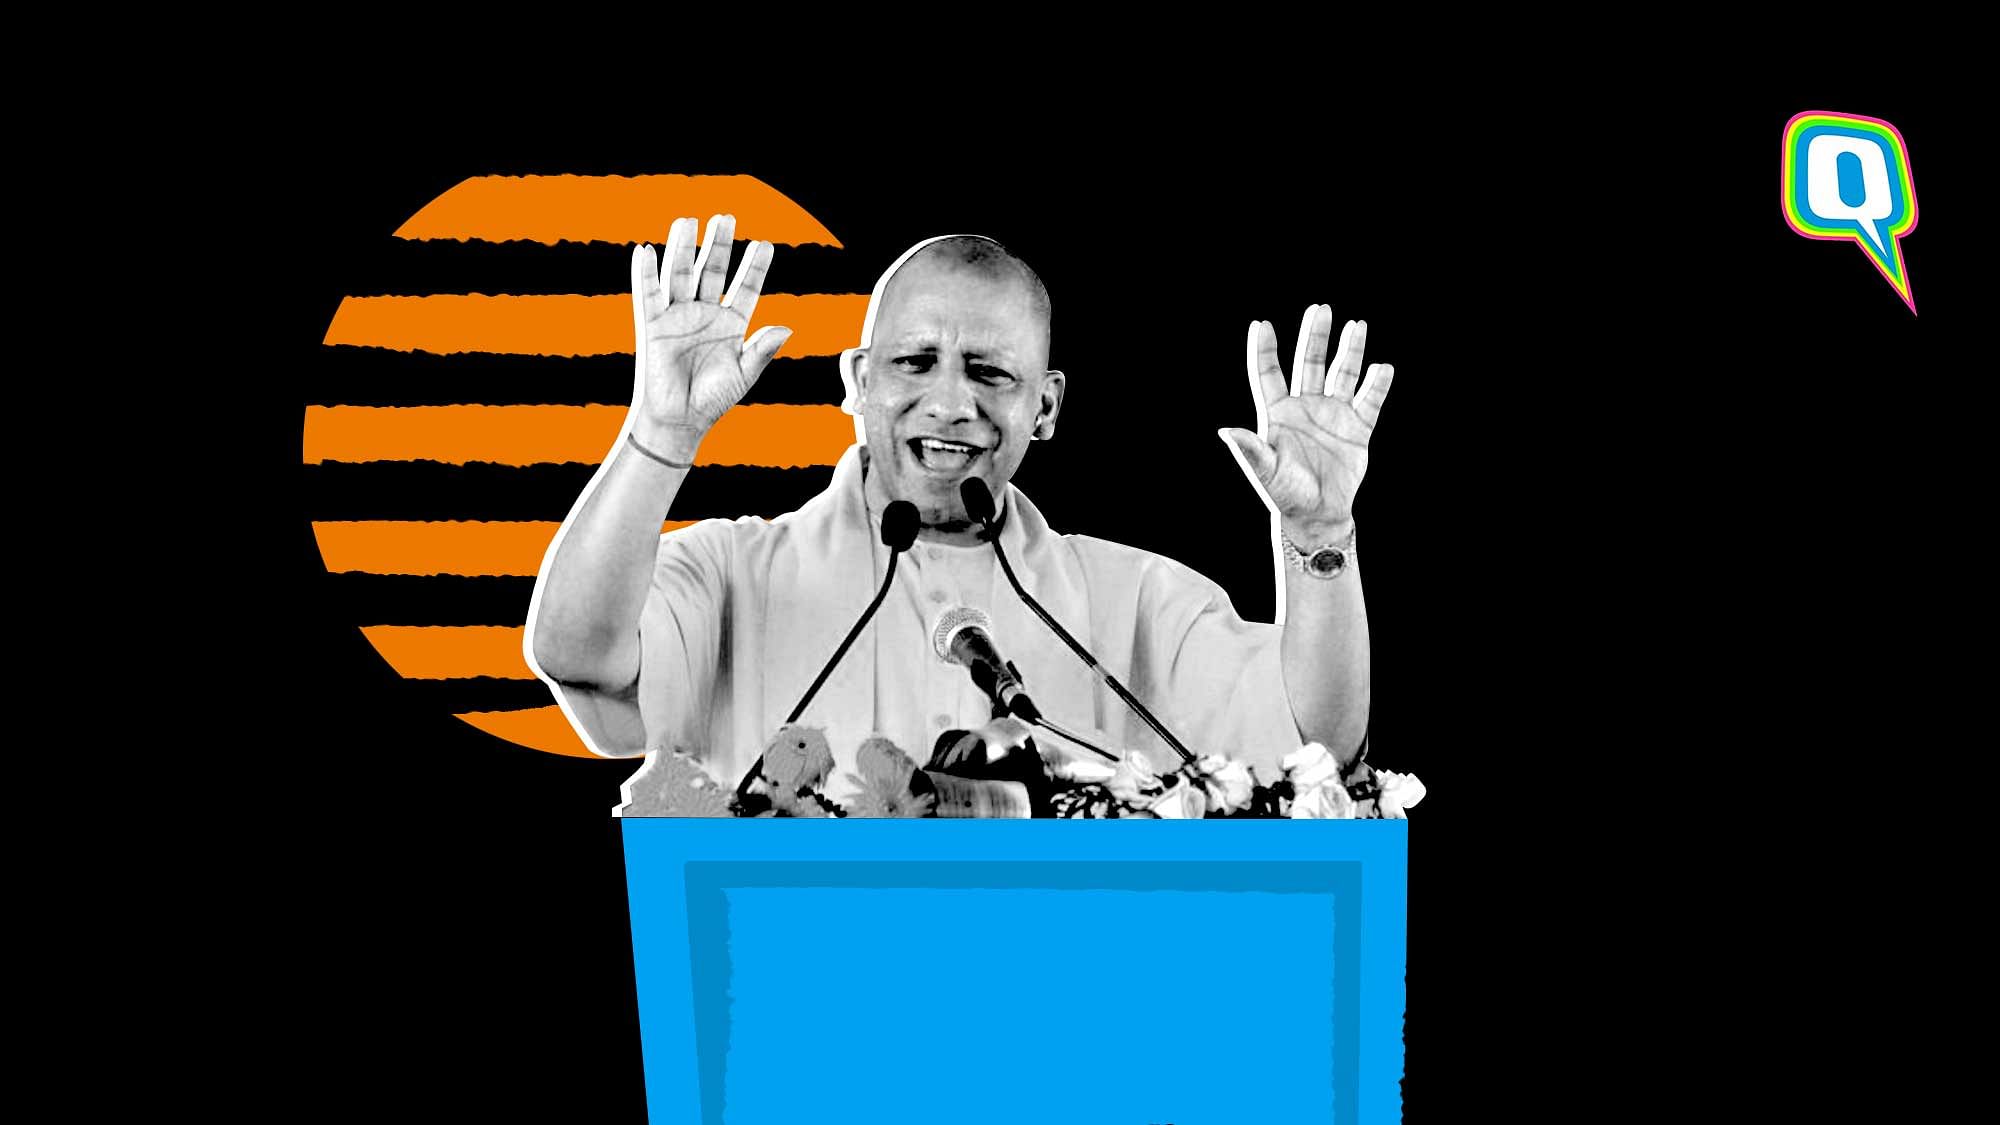 Uttar Pradesh Chief Minister Yogi Adityanath is known for his outrageous remarks on communal hatred.